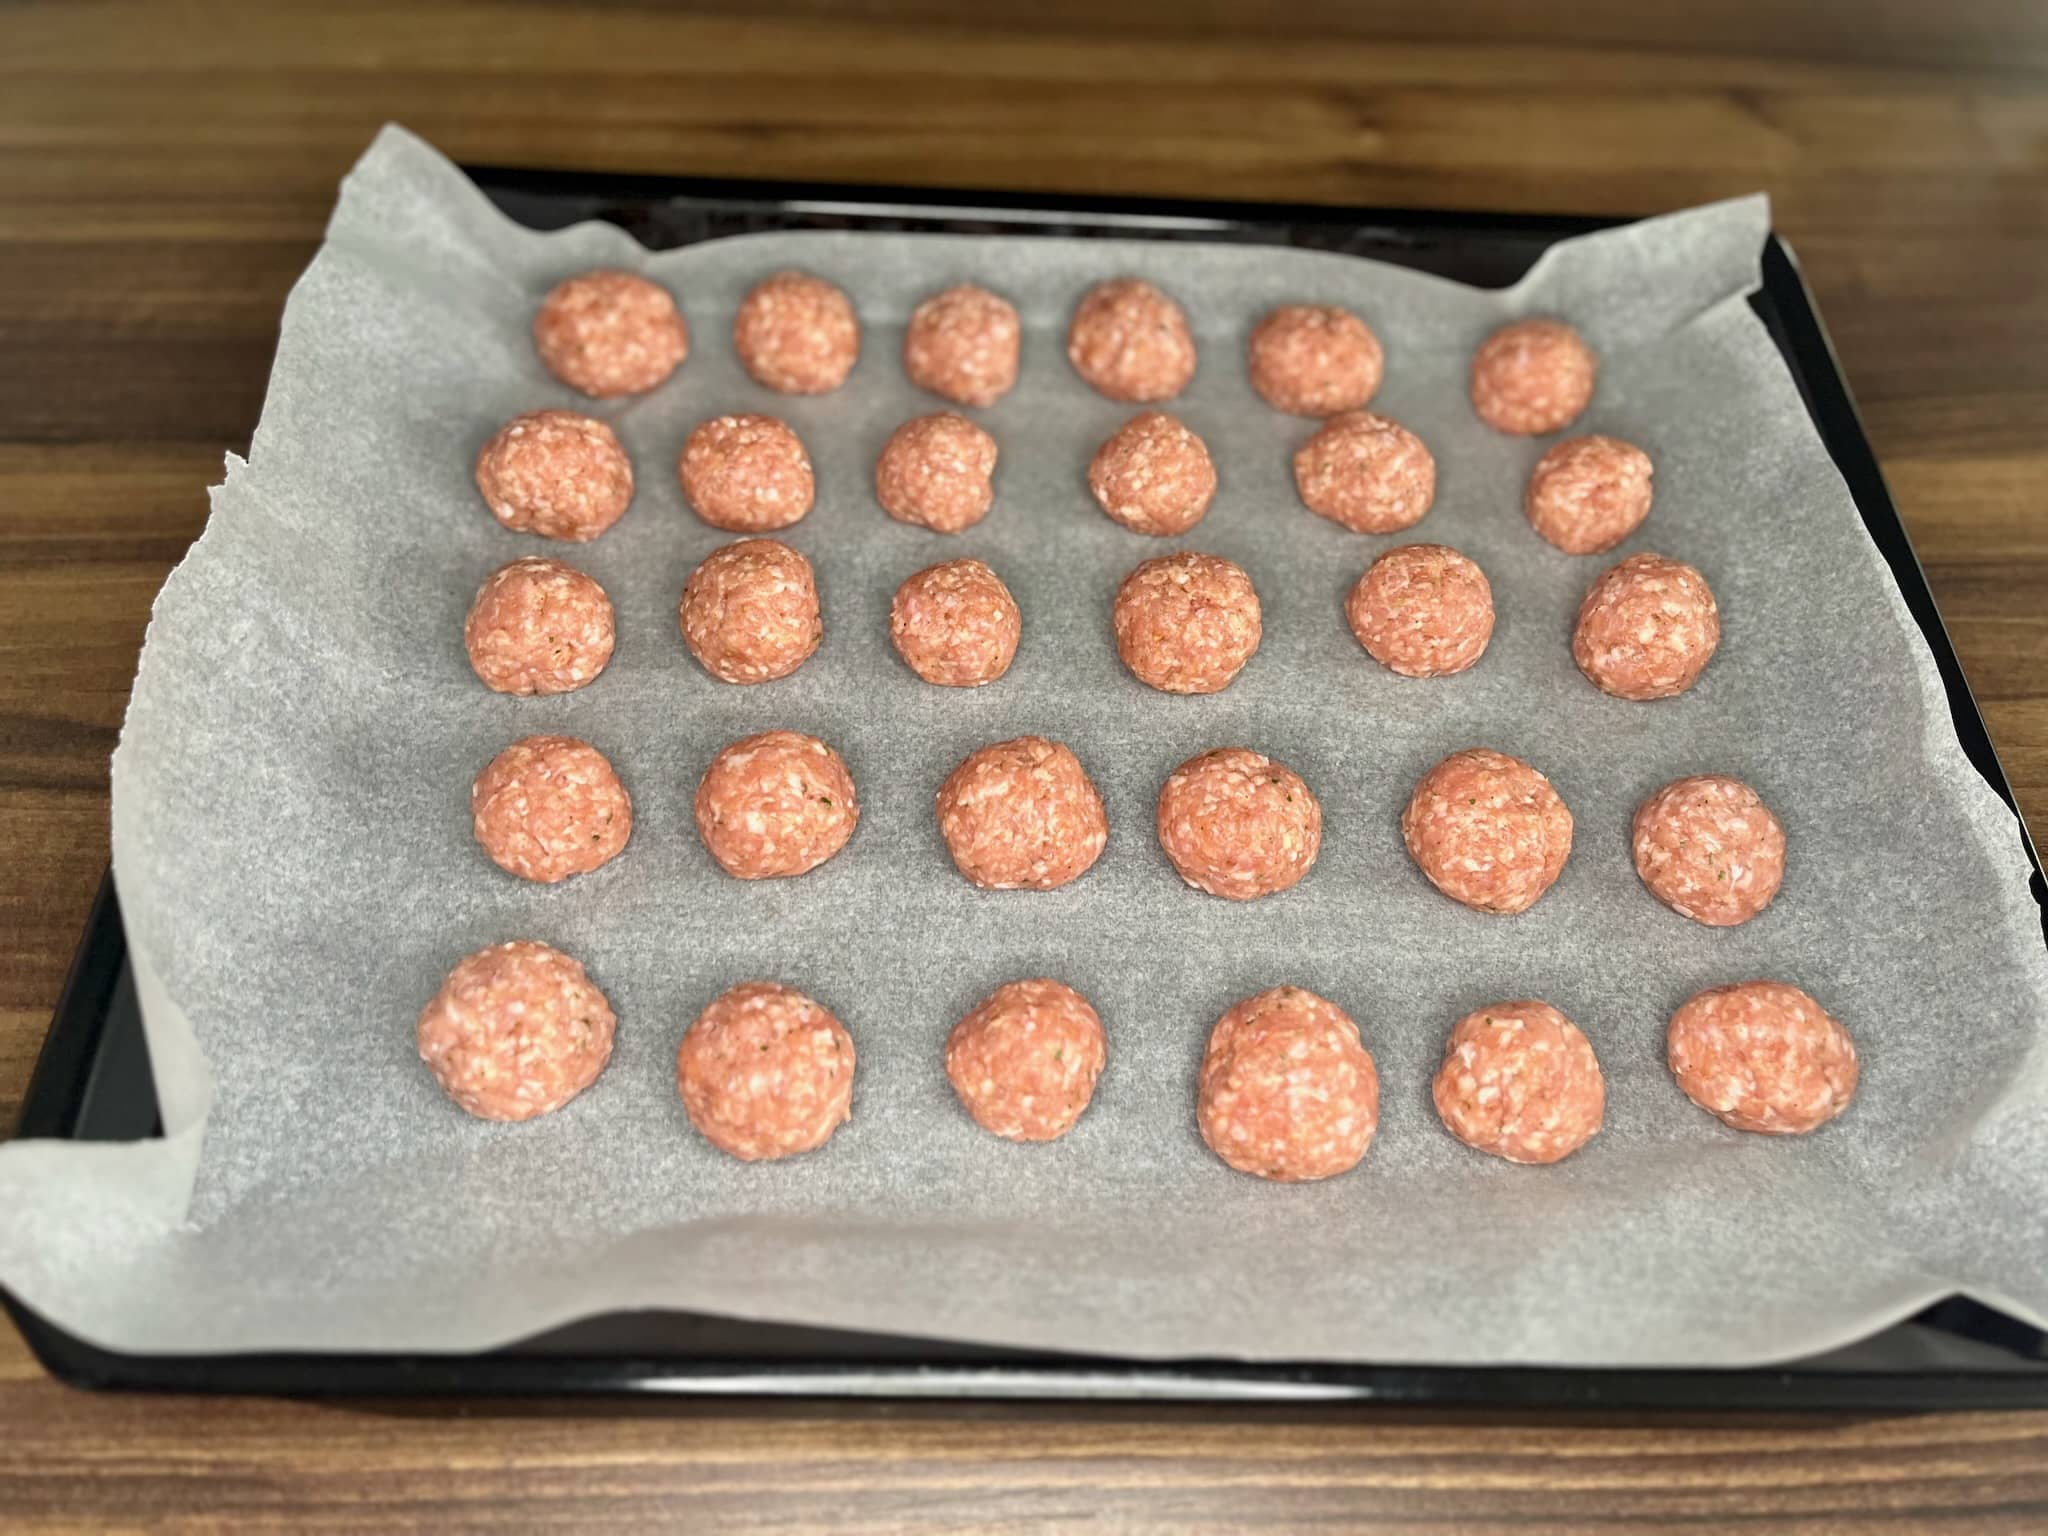 Formed meatballs the size of a golf ball on a baking tray